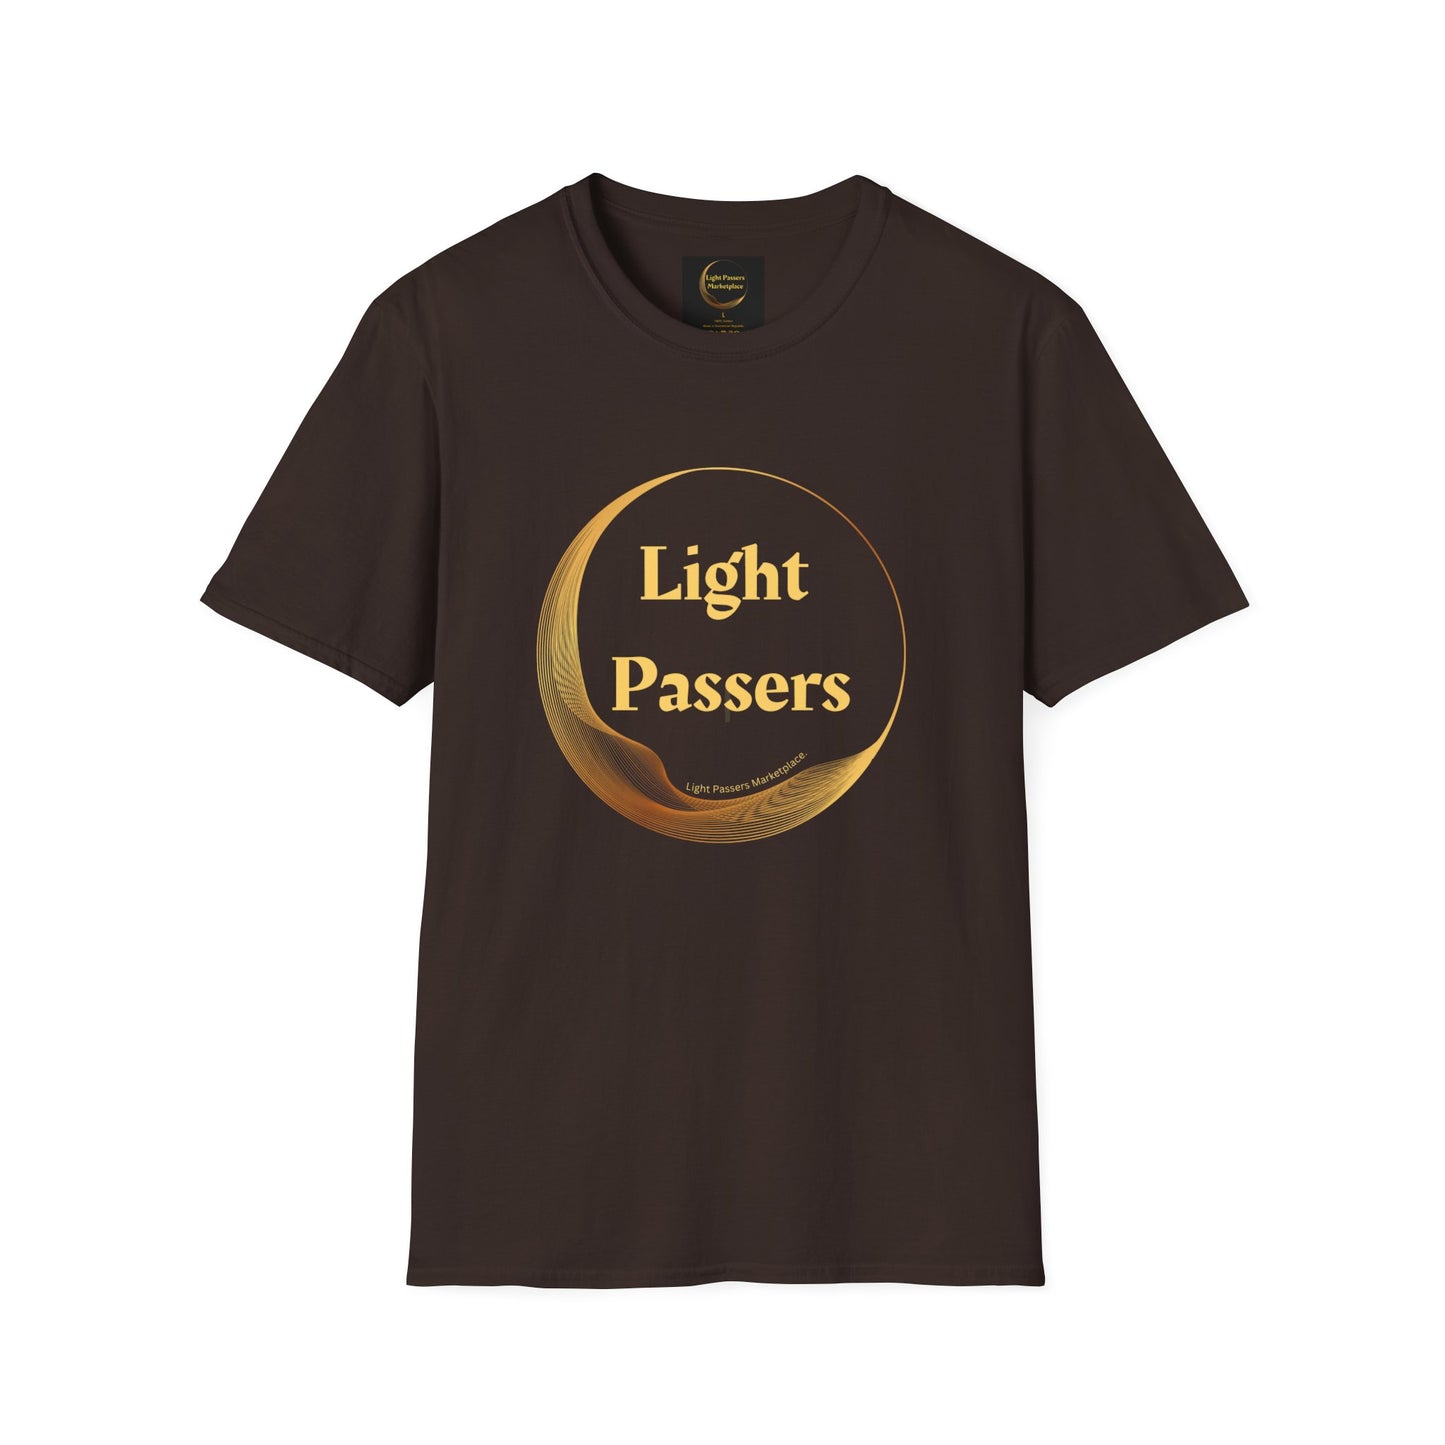 A brown unisex heavy cotton tee featuring a yellow logo design. Smooth surface for vivid printing, no side seams, tape on shoulders for durability. Light Passers Gold Logo Unisex T-shirt.